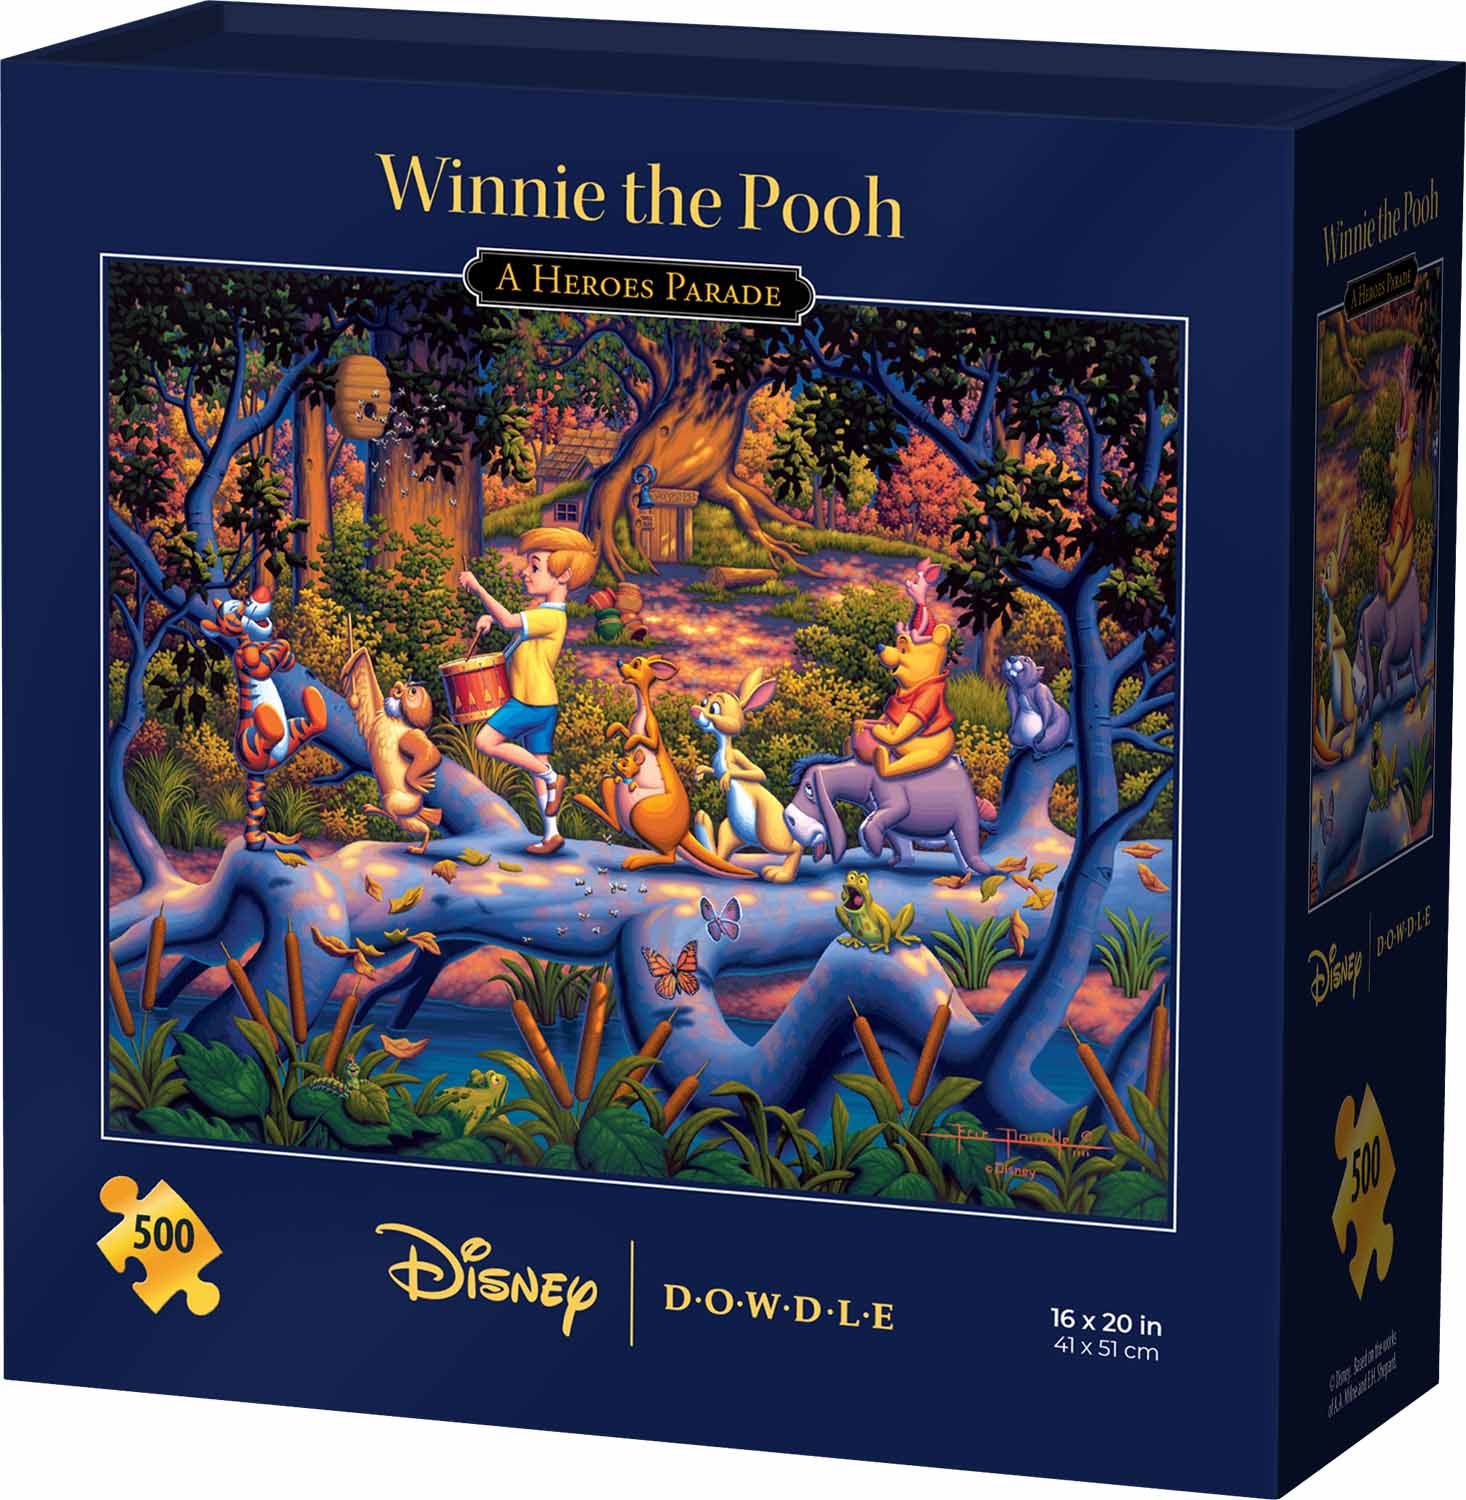 Winnie the Pooh A Heroes Parade Disney Jigsaw Puzzle